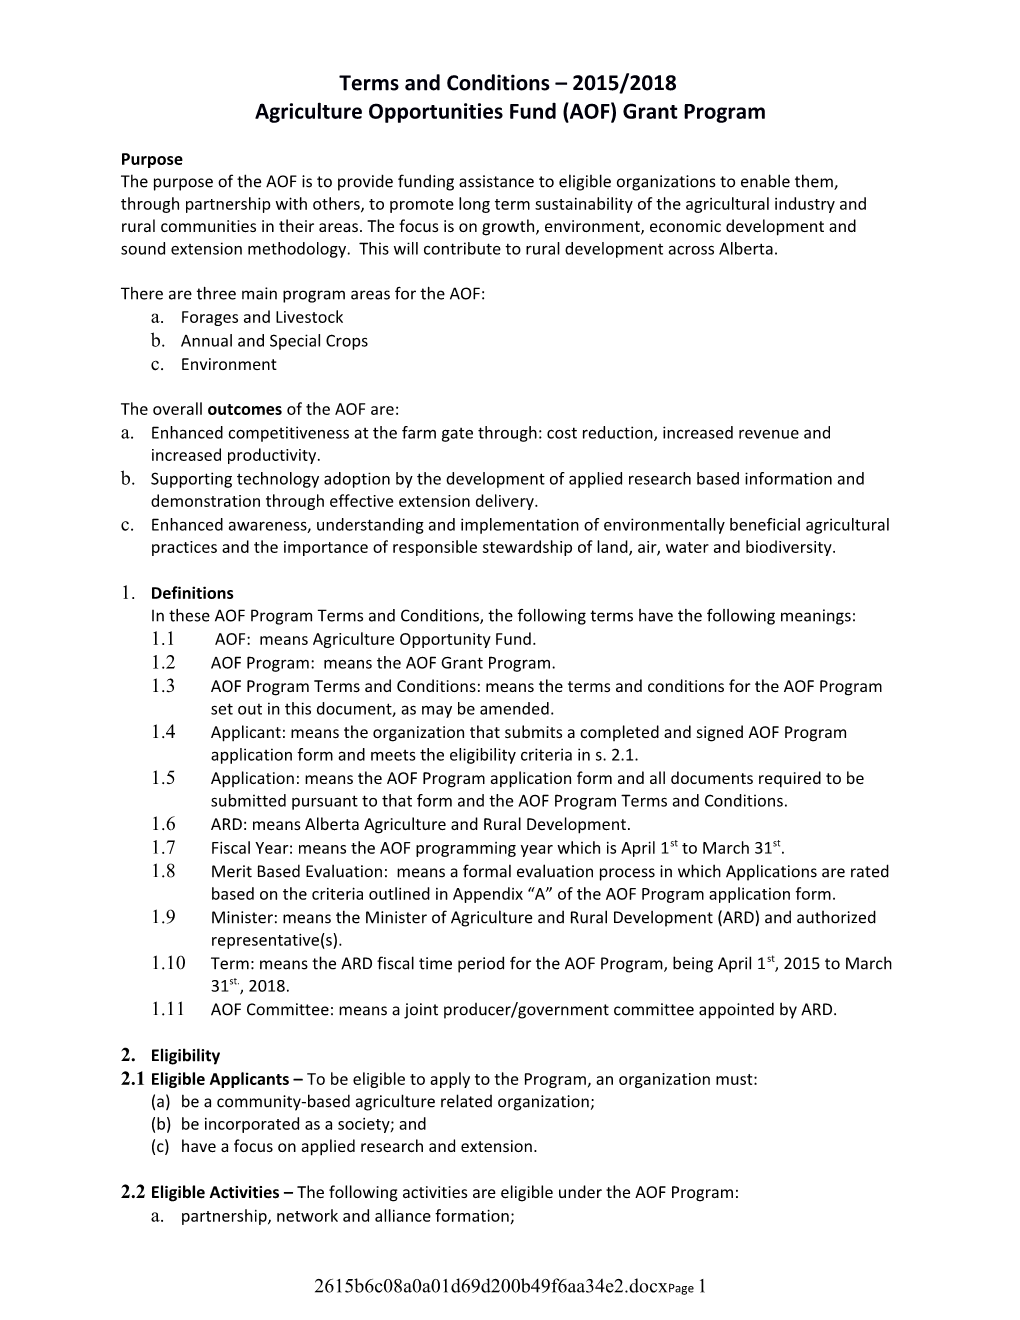 DRAFT Terms and Conditions 2012/2015